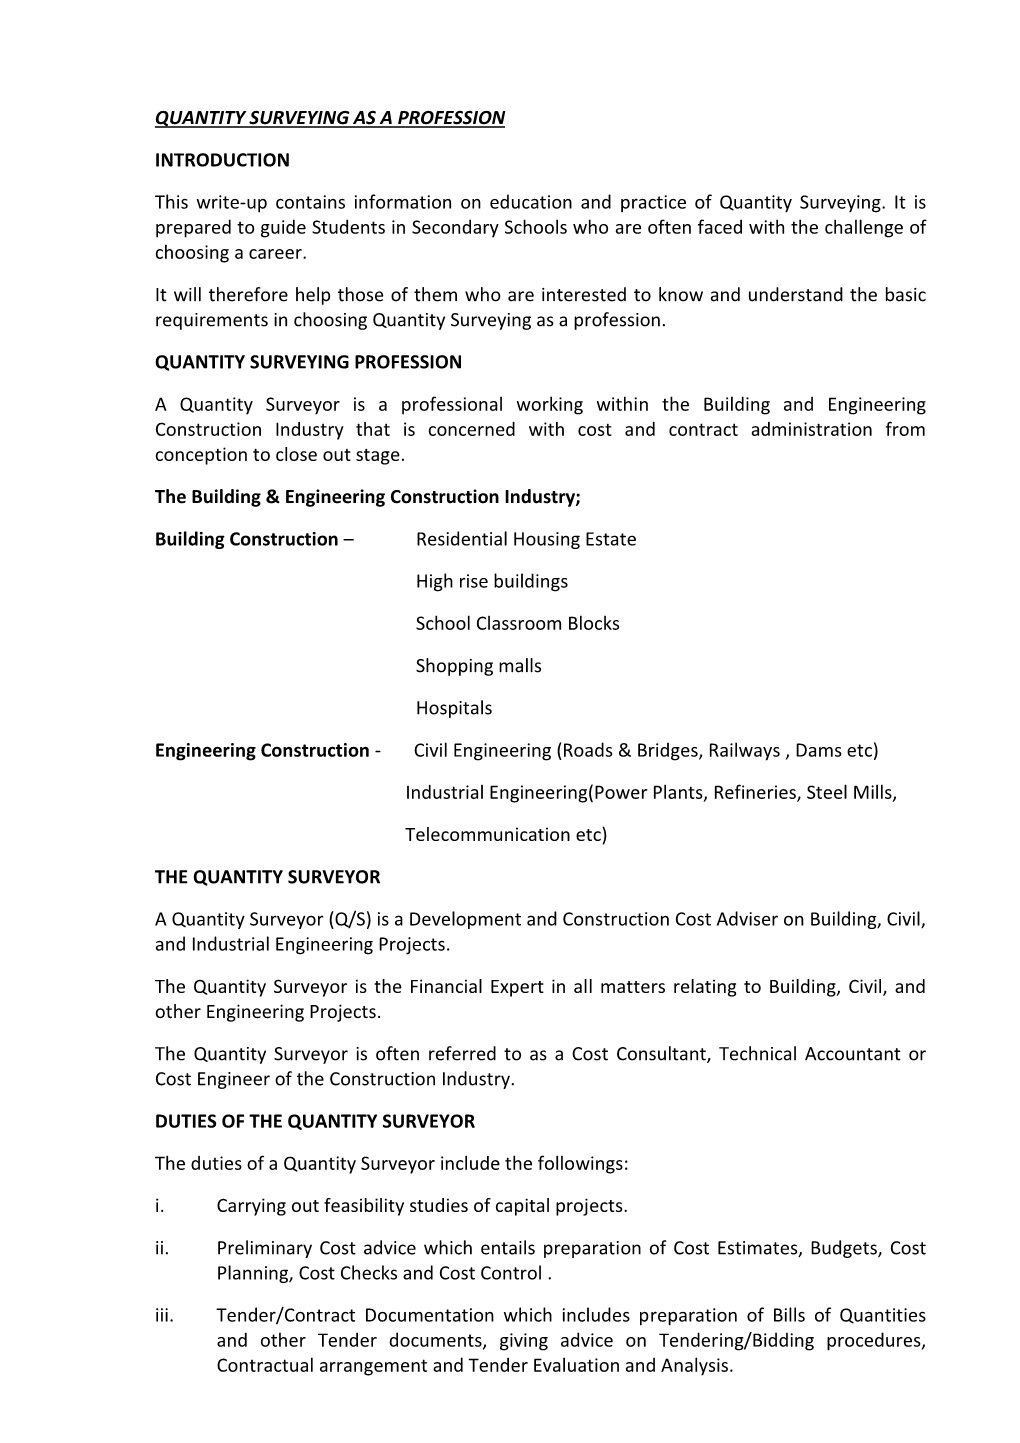 Quantity Surveying As a Profession Introduction